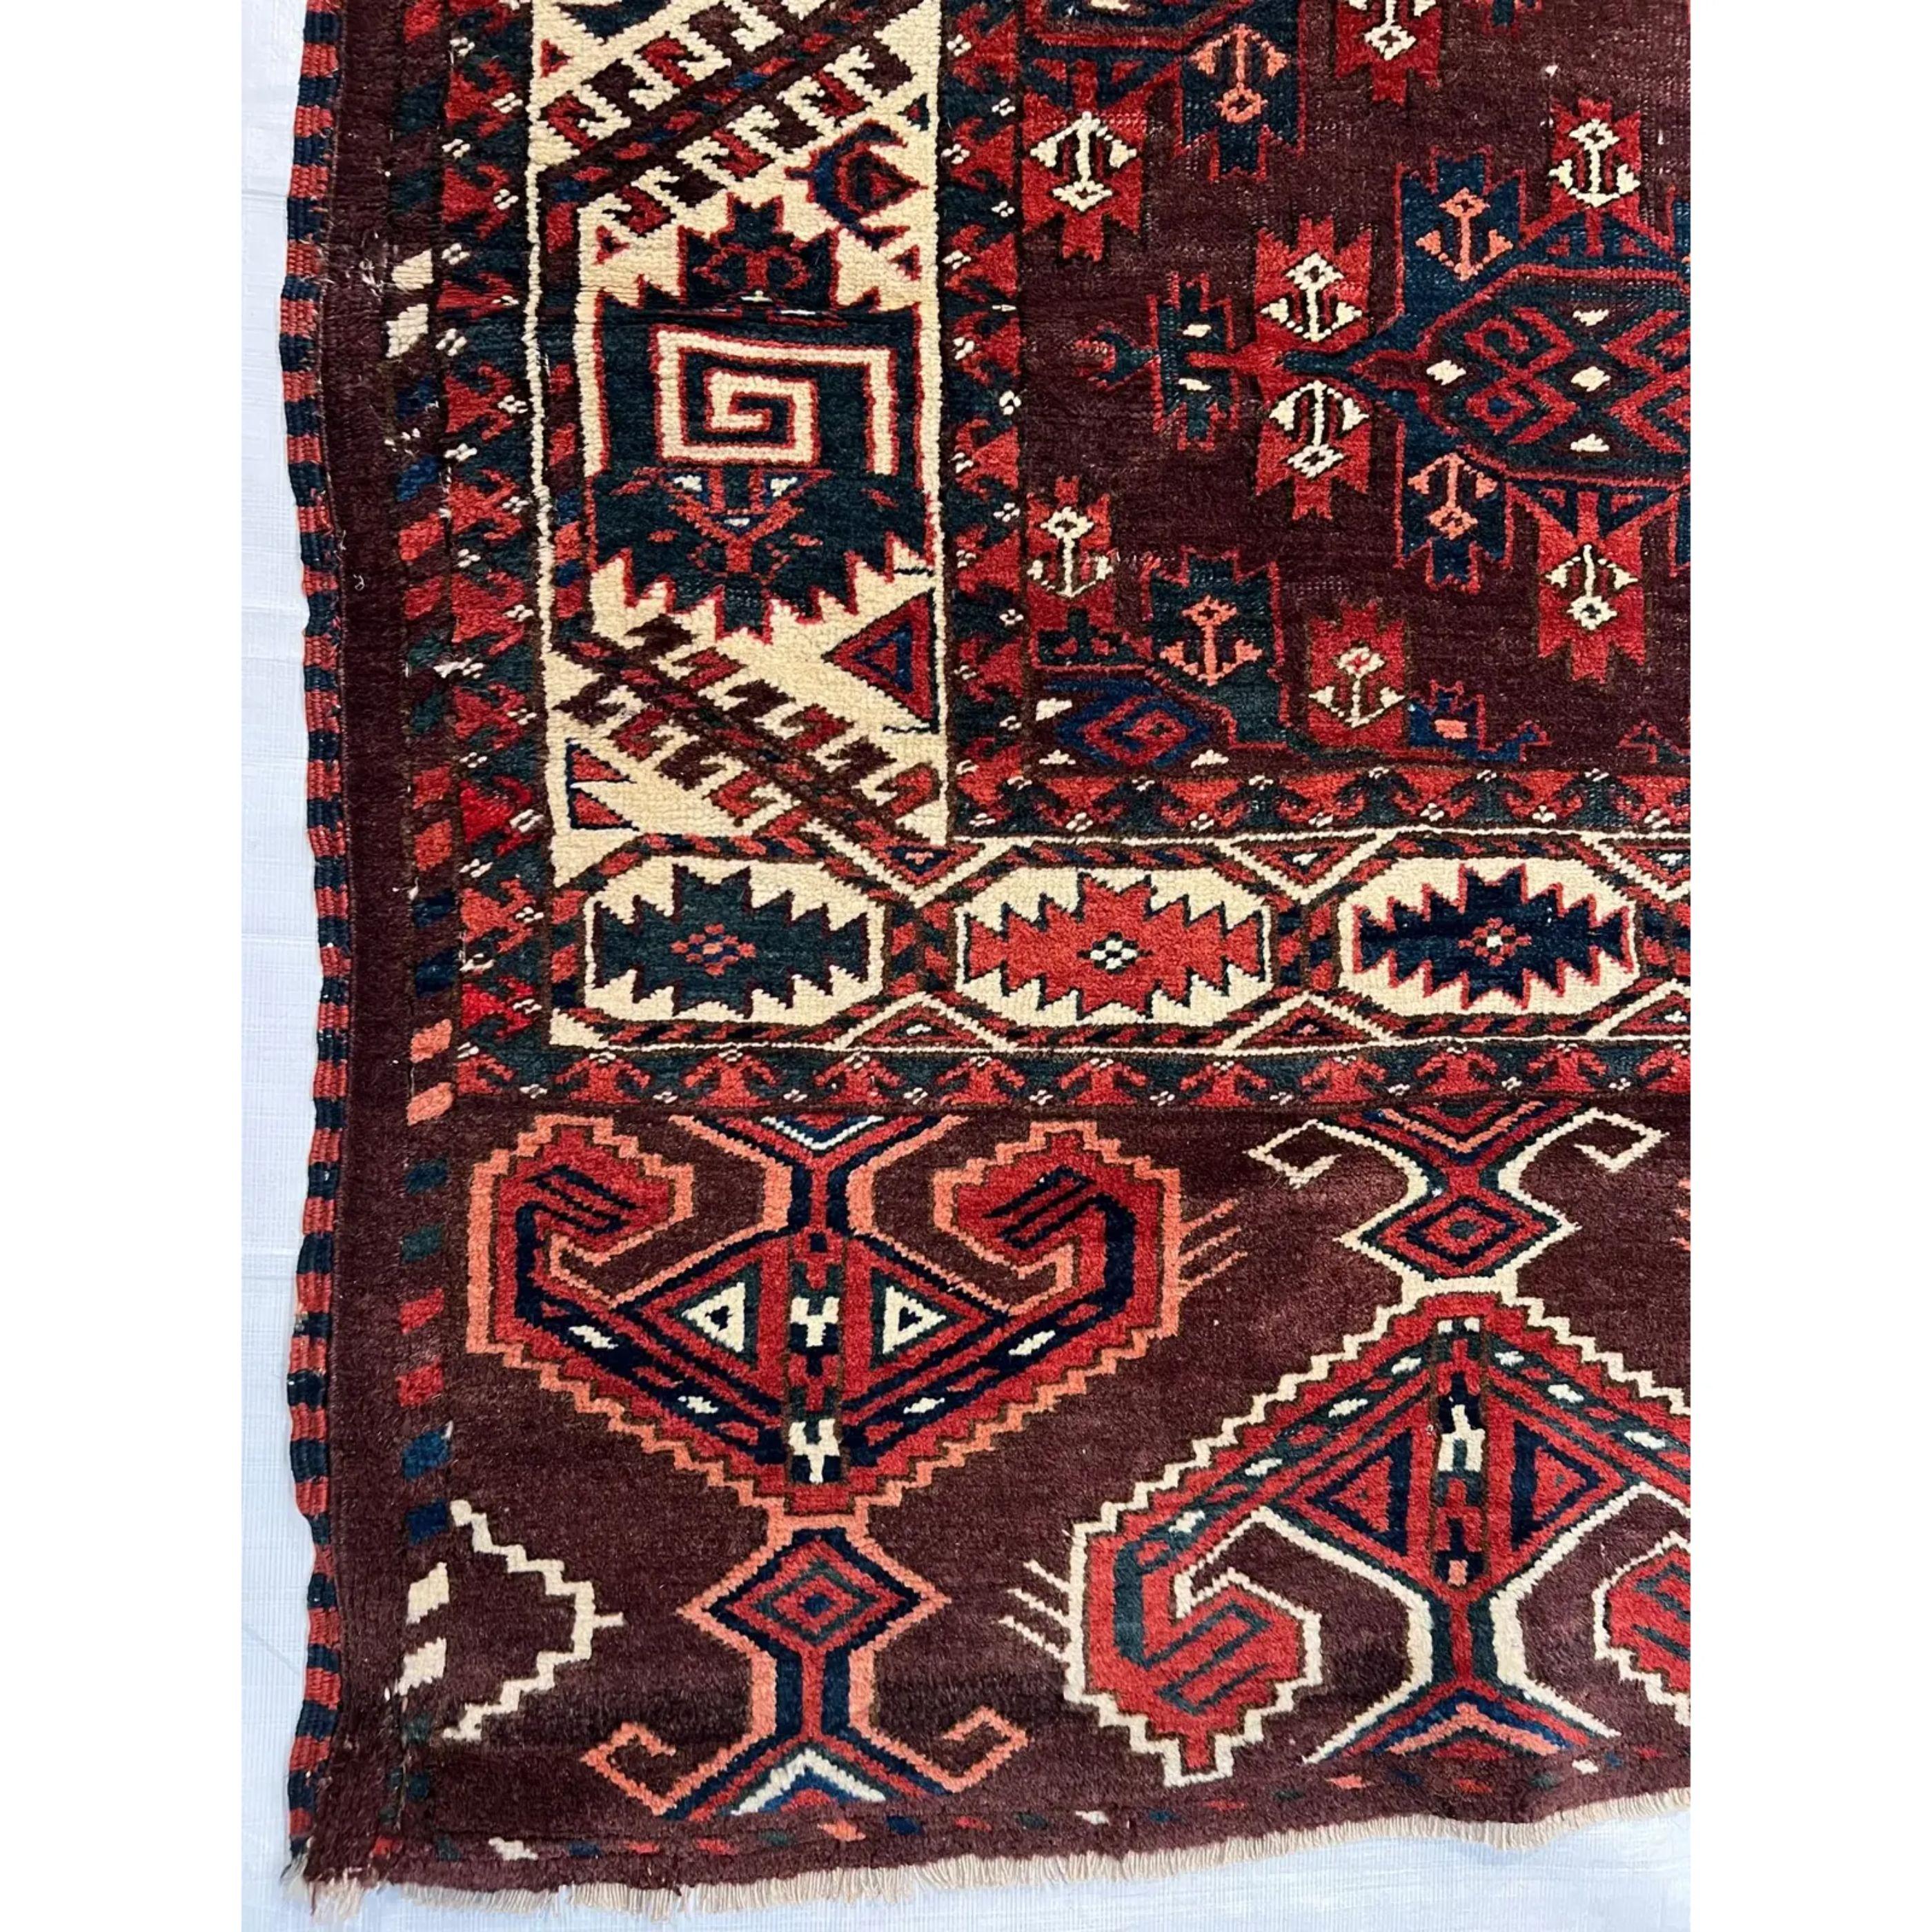 1900s Antique Turkeman Rug, handmade and hand-knotted, tribal carpet